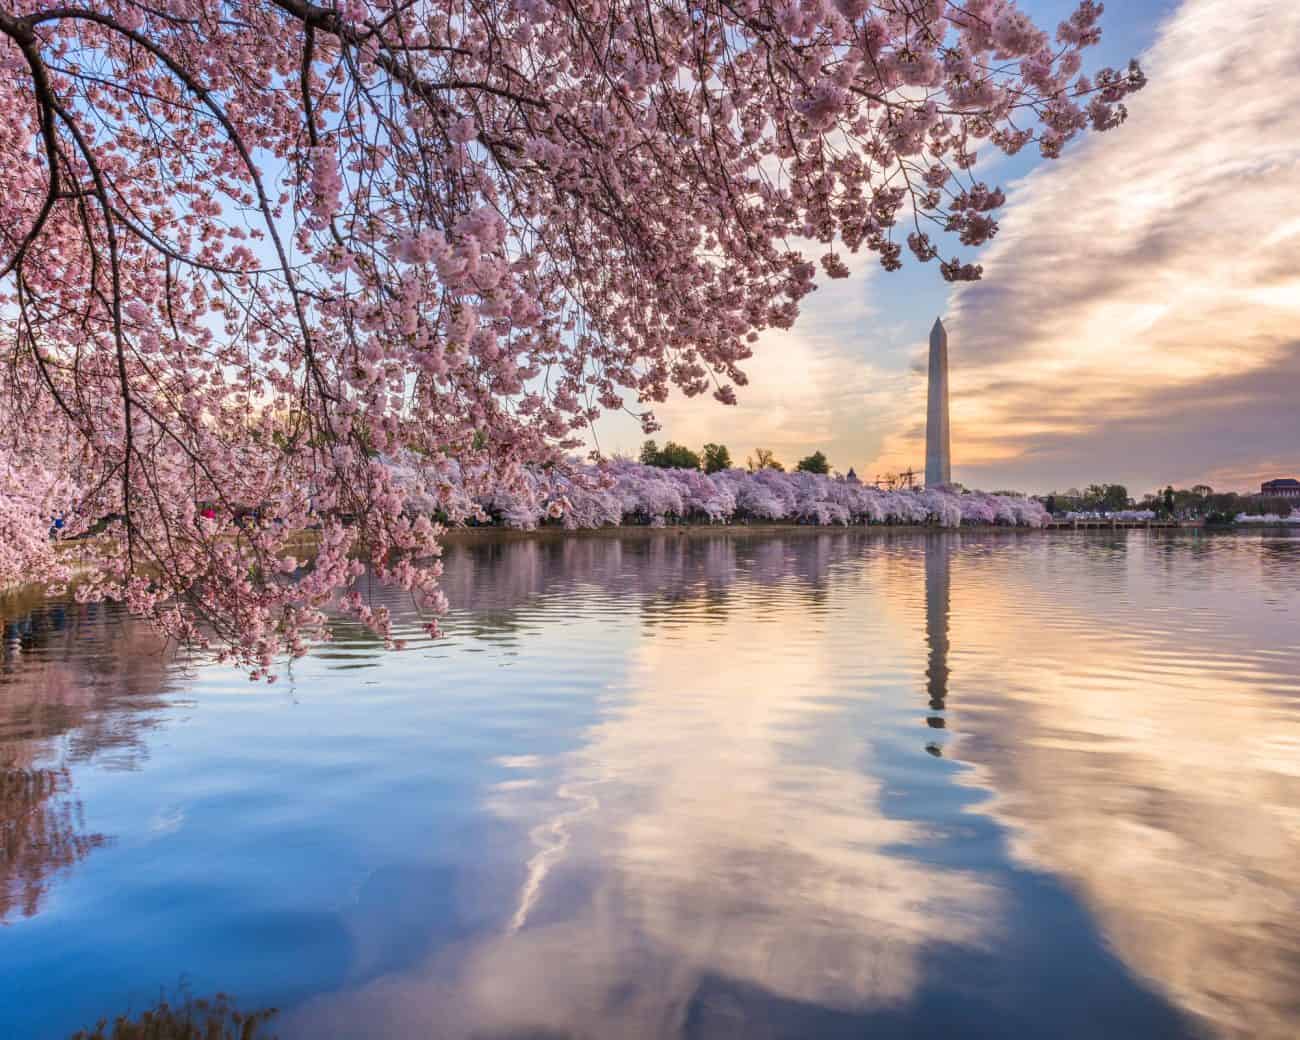 washington dc in spring with cherry blossoms